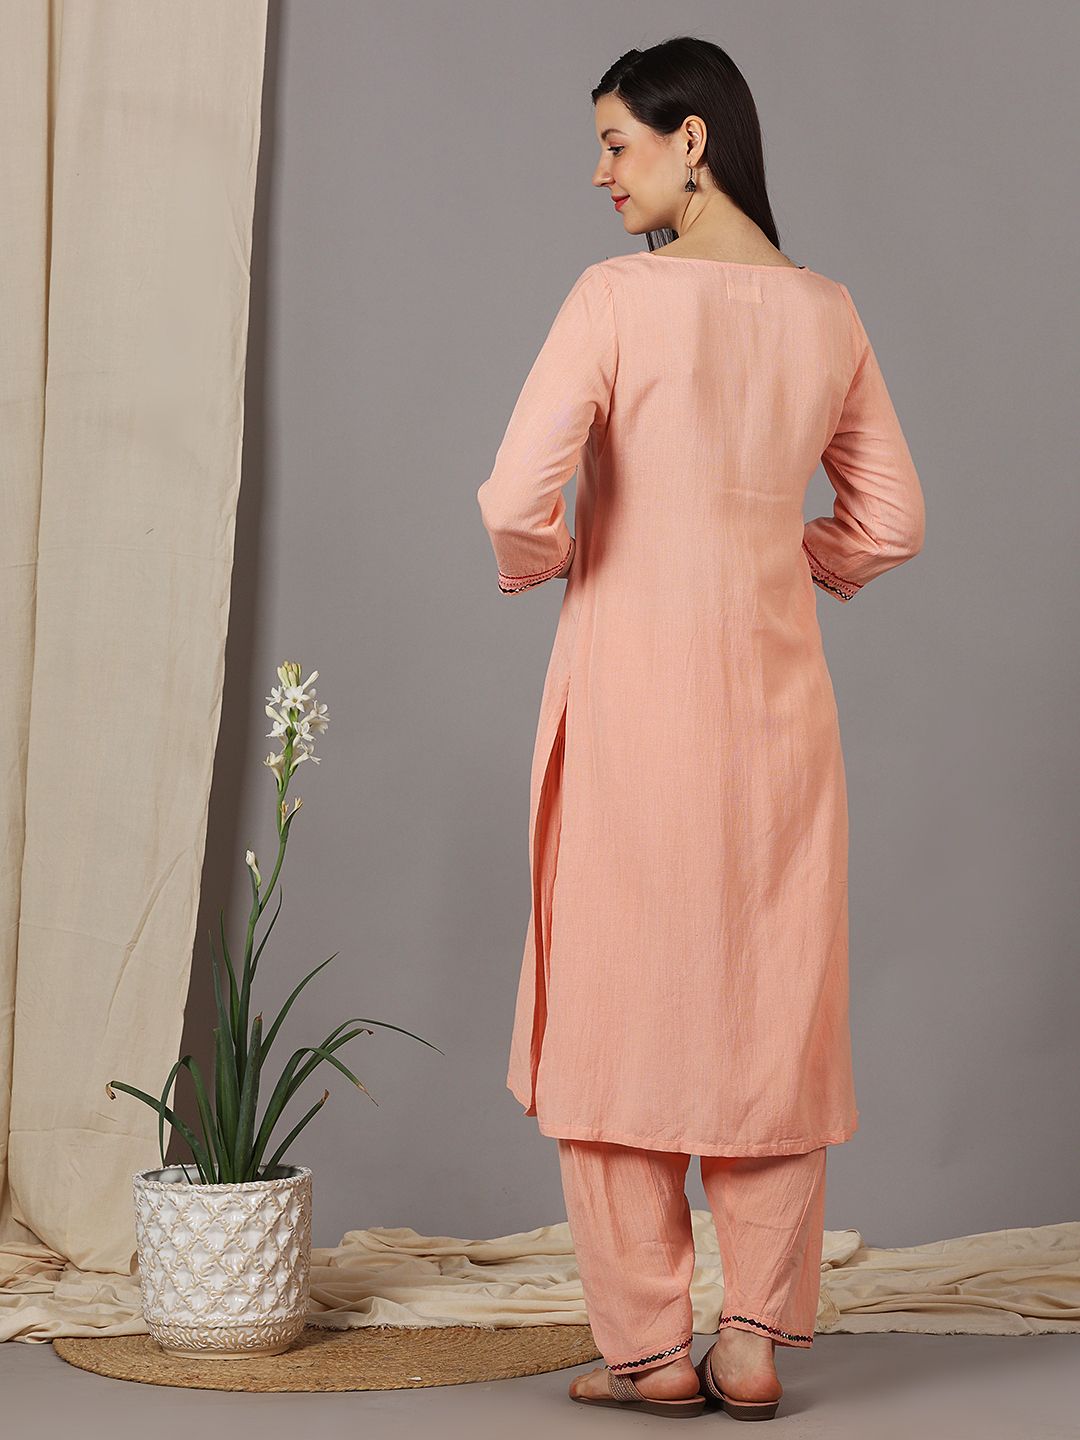 PEACH FRONT MULTI COLORED EMBROIDERED KURTI WITH SALWAR